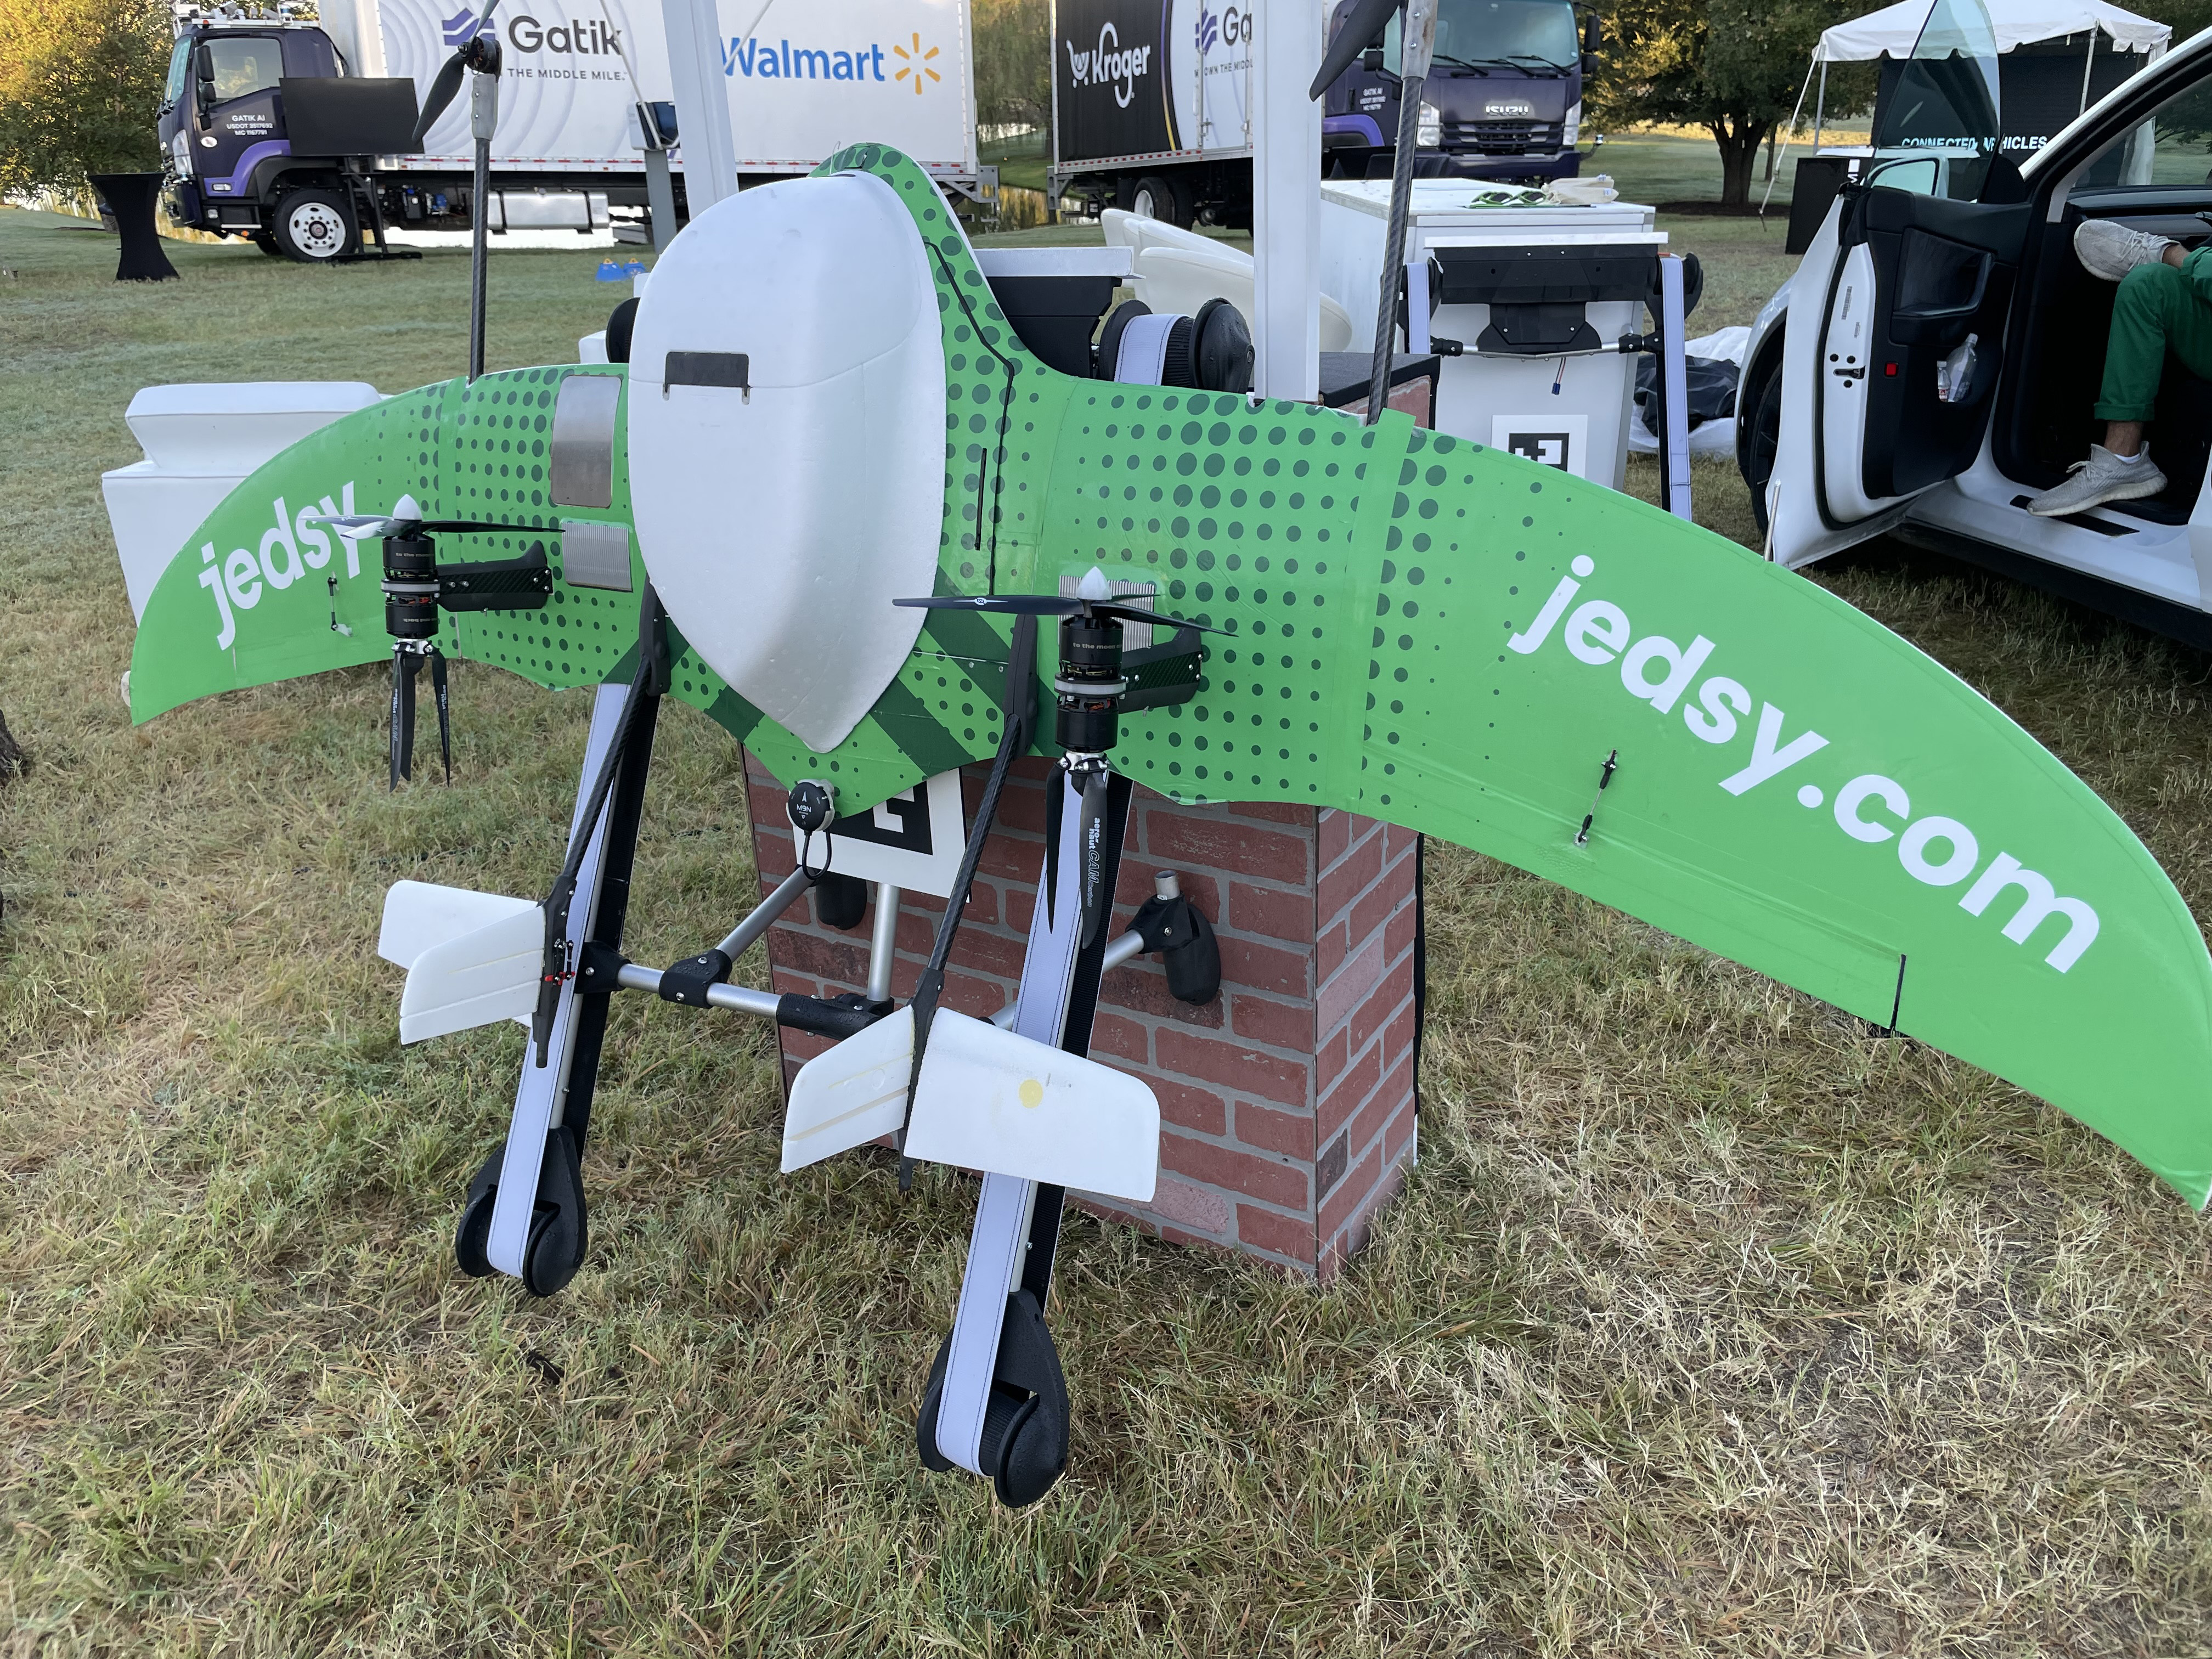 The Jedsy drone can fly more than 60 miles in a horizontal attitude, transitioning to vertical in the final seconds before it perches. Photo by Tom Haines.